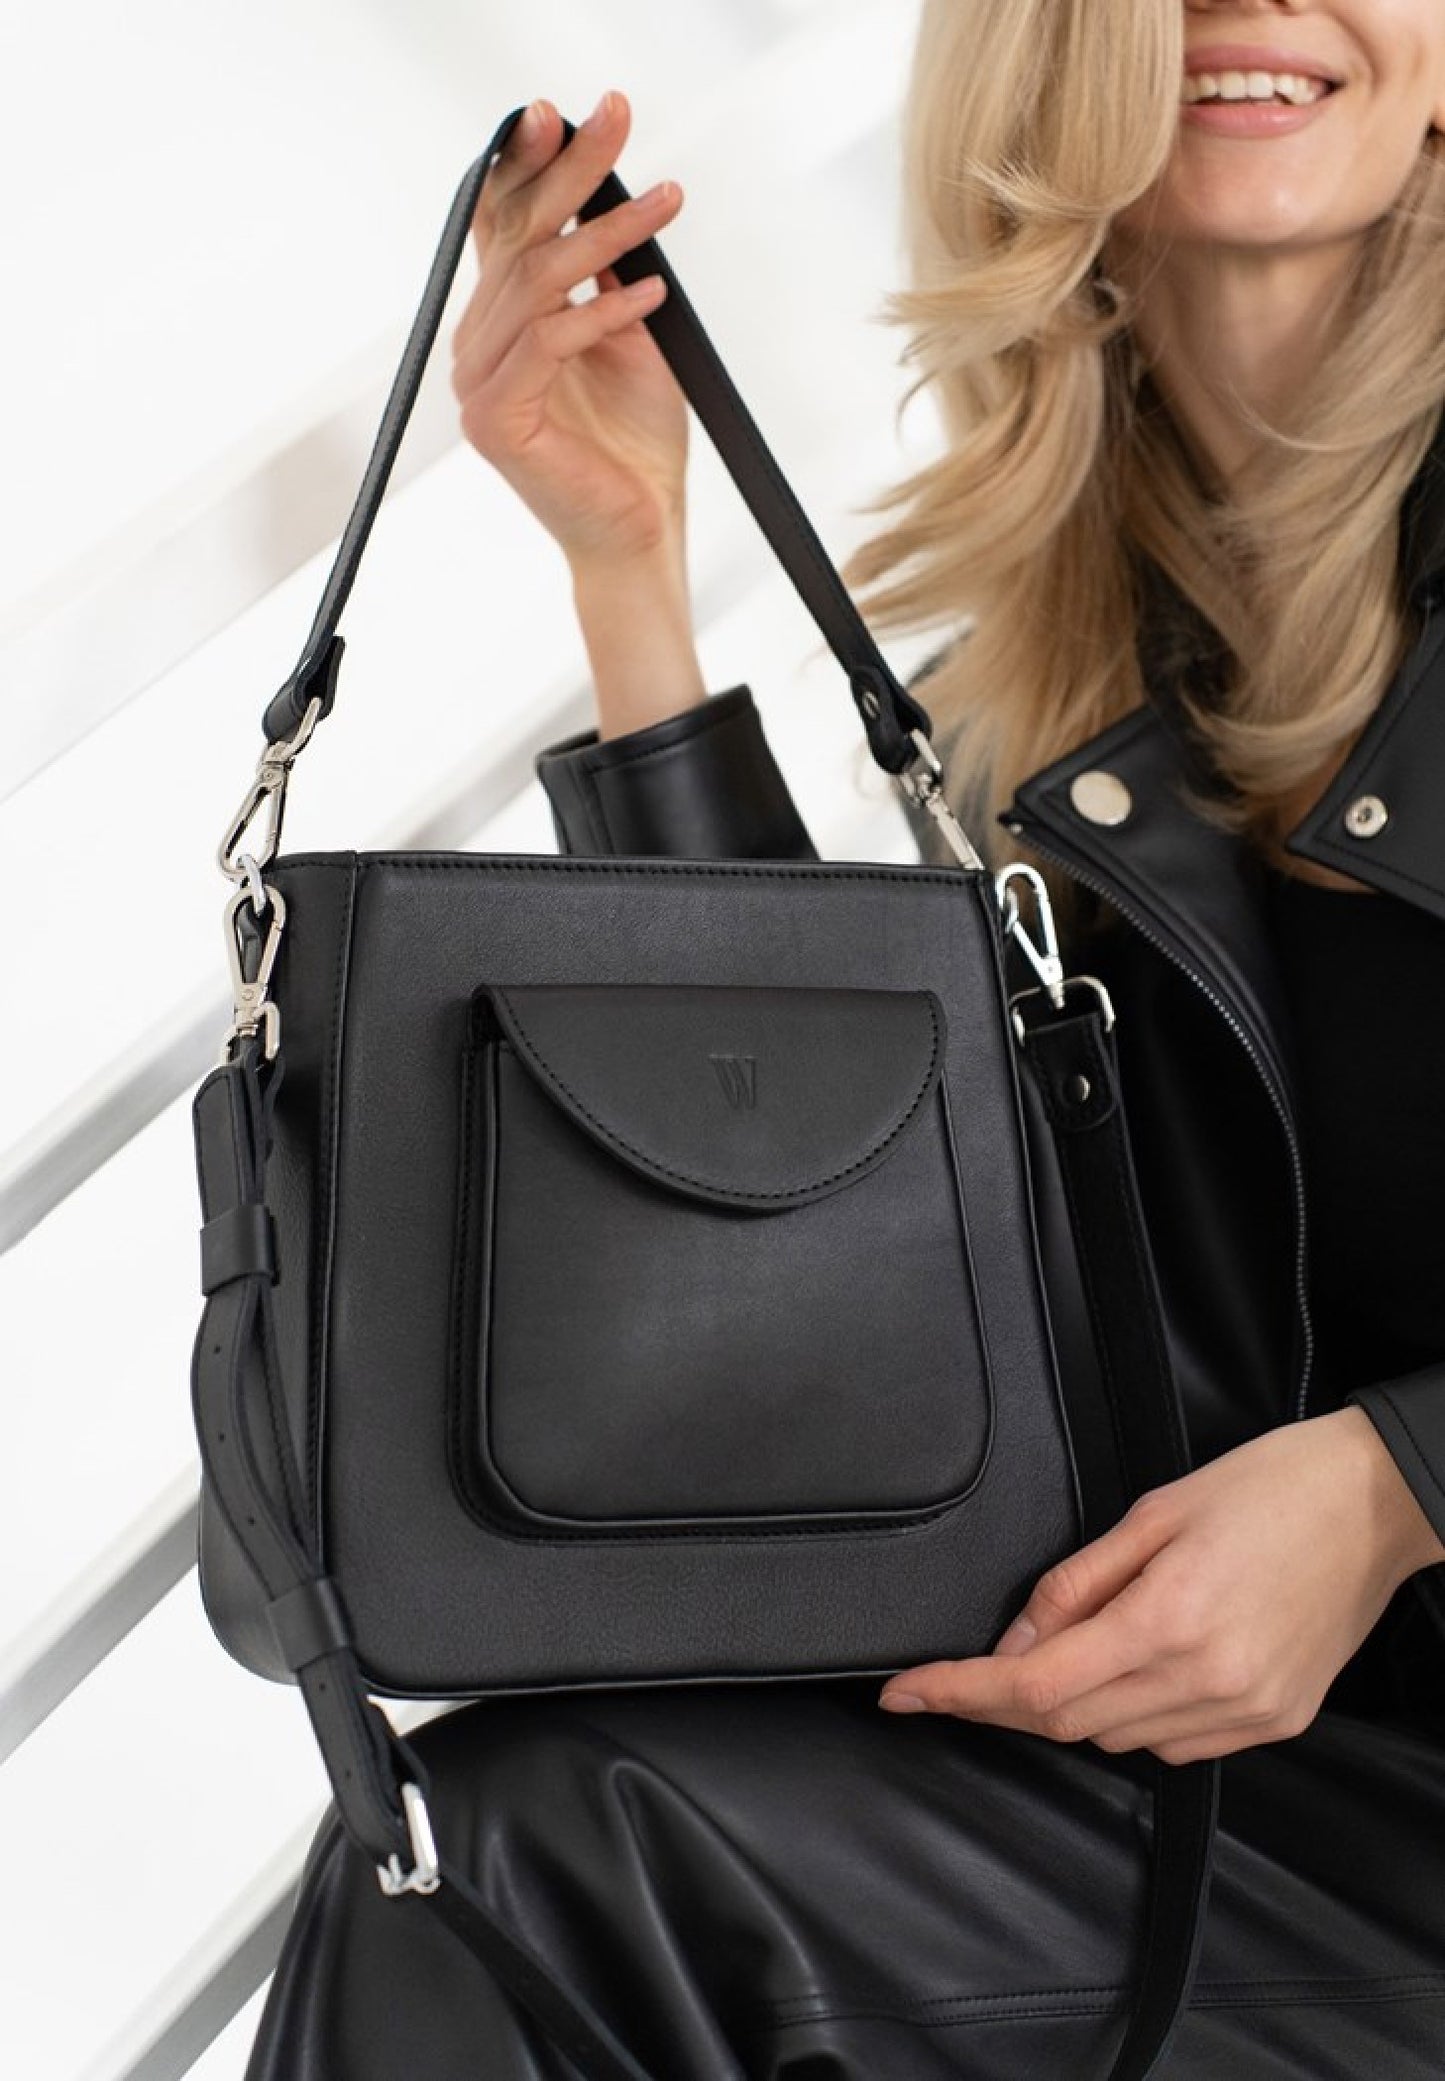 beautiful woman with blond hair is holding a black exquisite leather bag for women